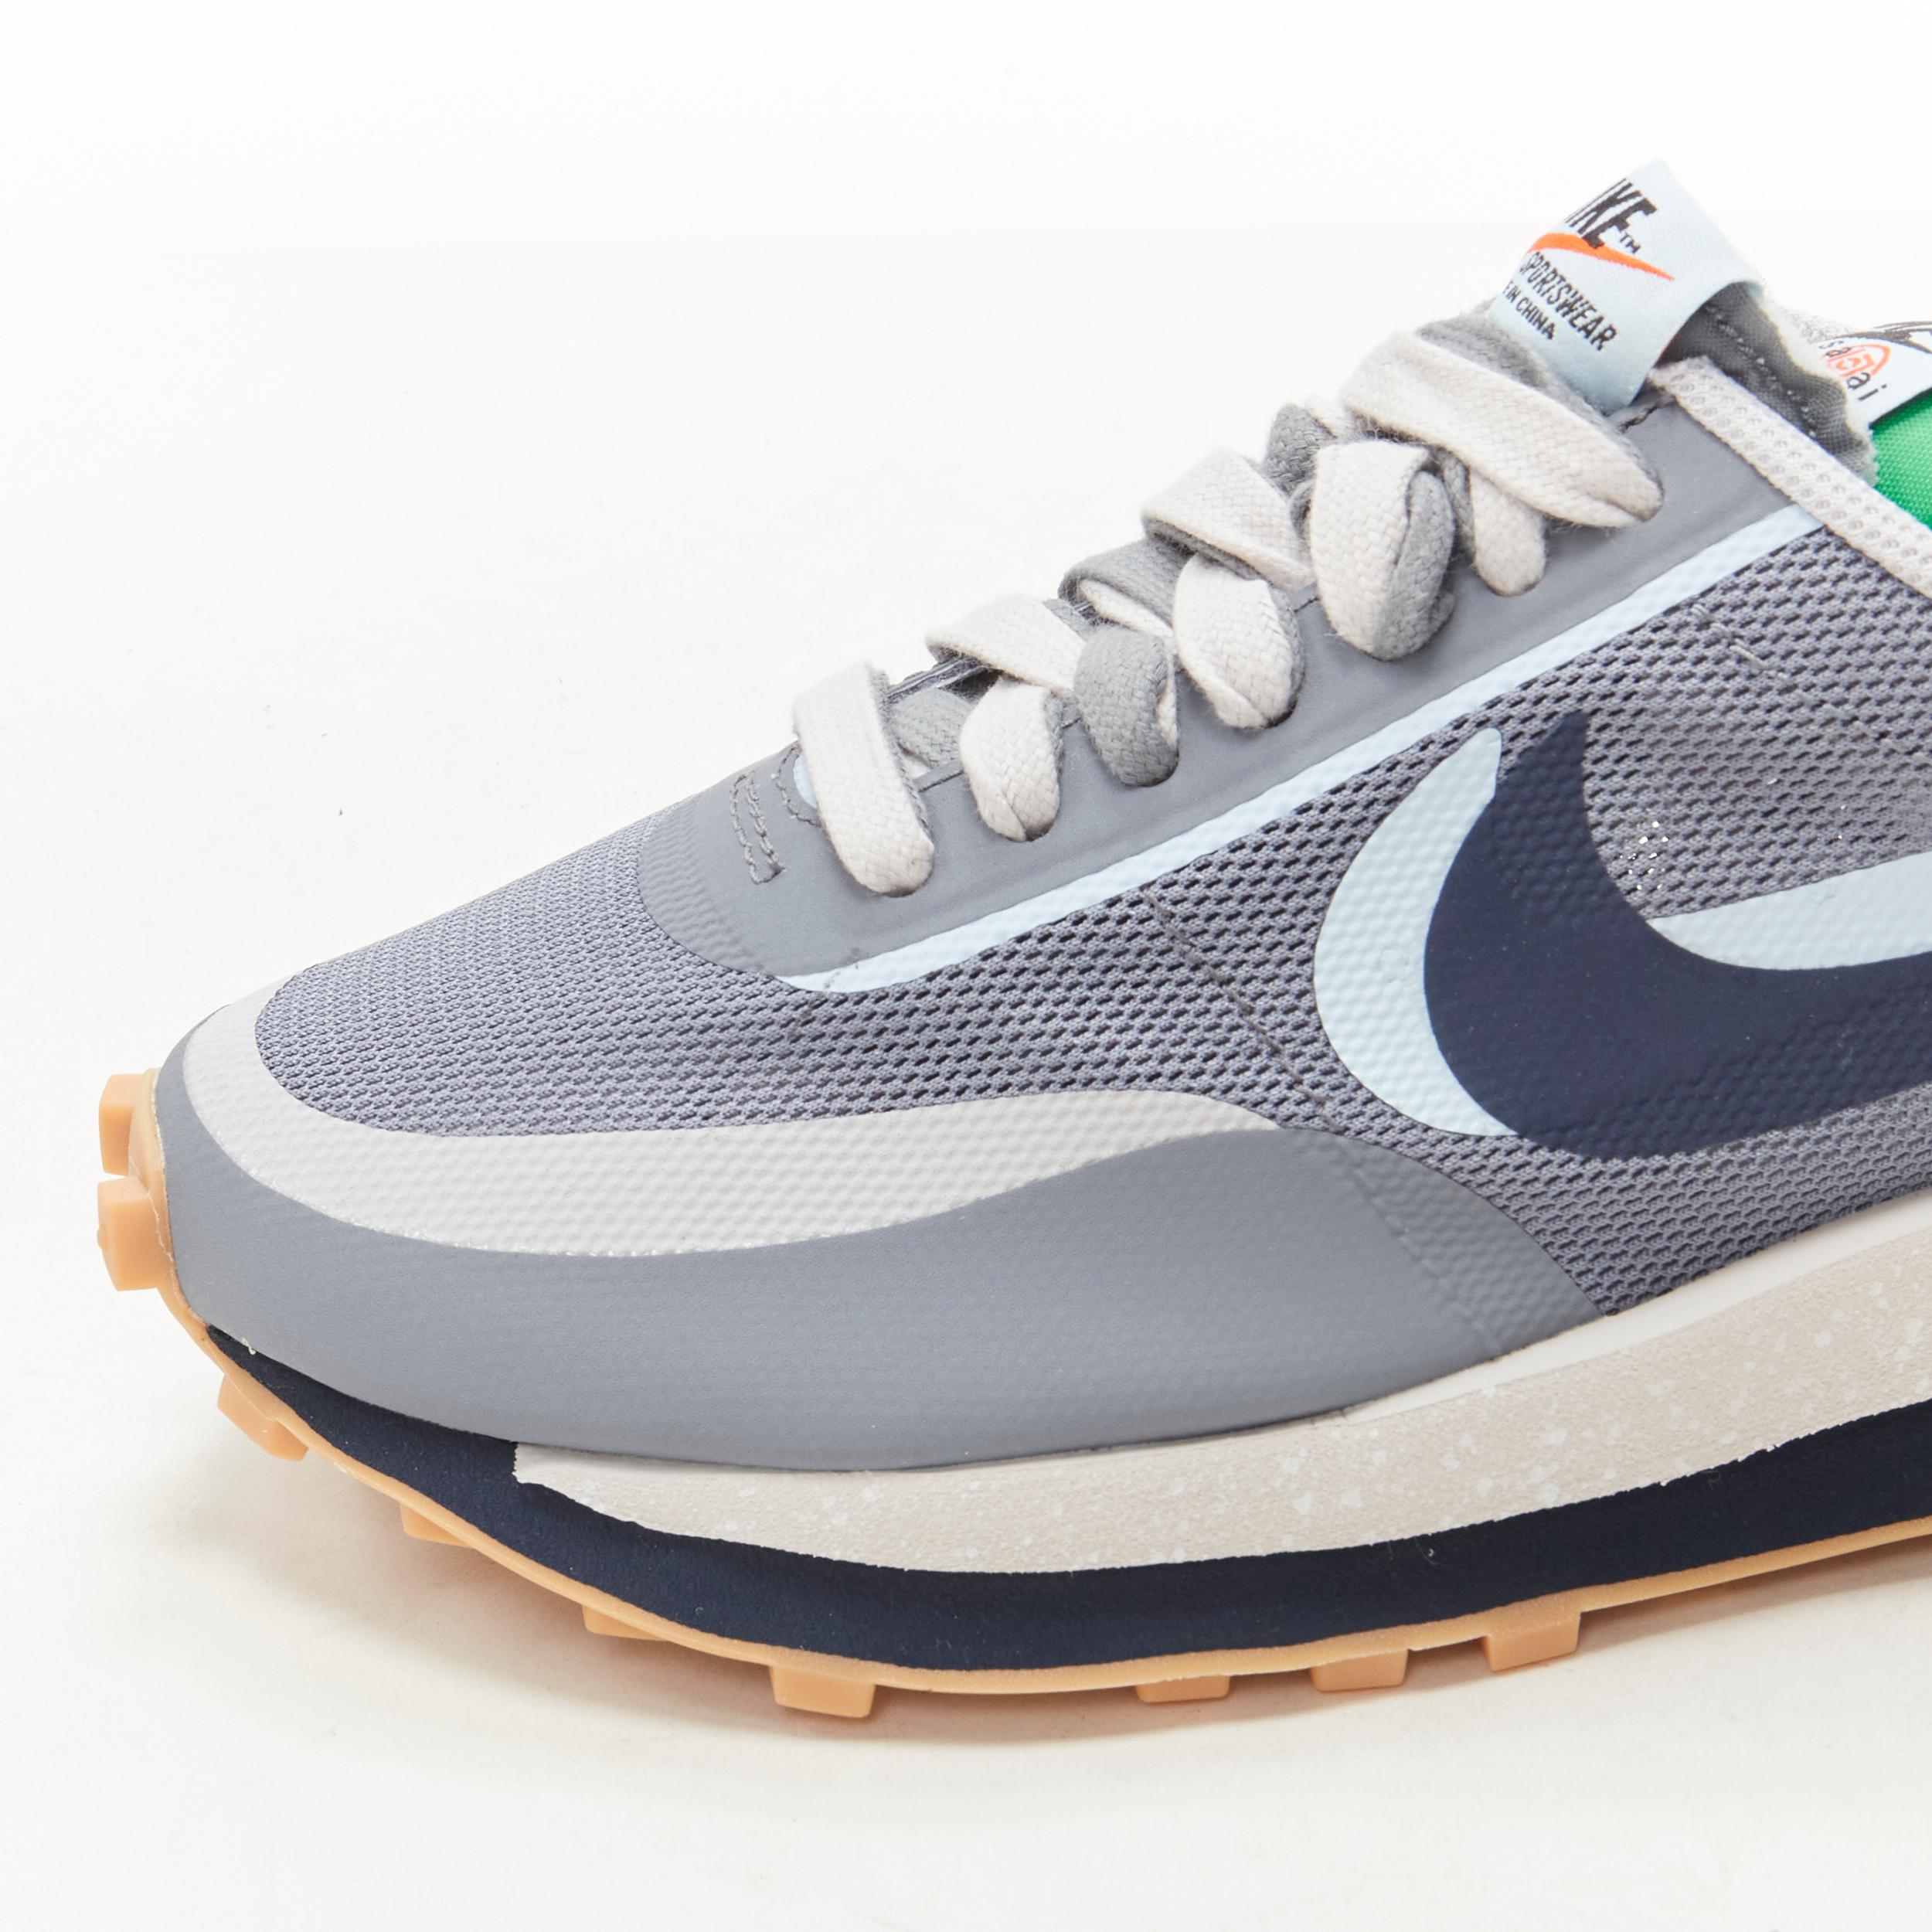 NIKE SACAI CLOT LD Waffle DH3114 001 grey navy sneaker US5 EU37.5 In Excellent Condition For Sale In Hong Kong, NT